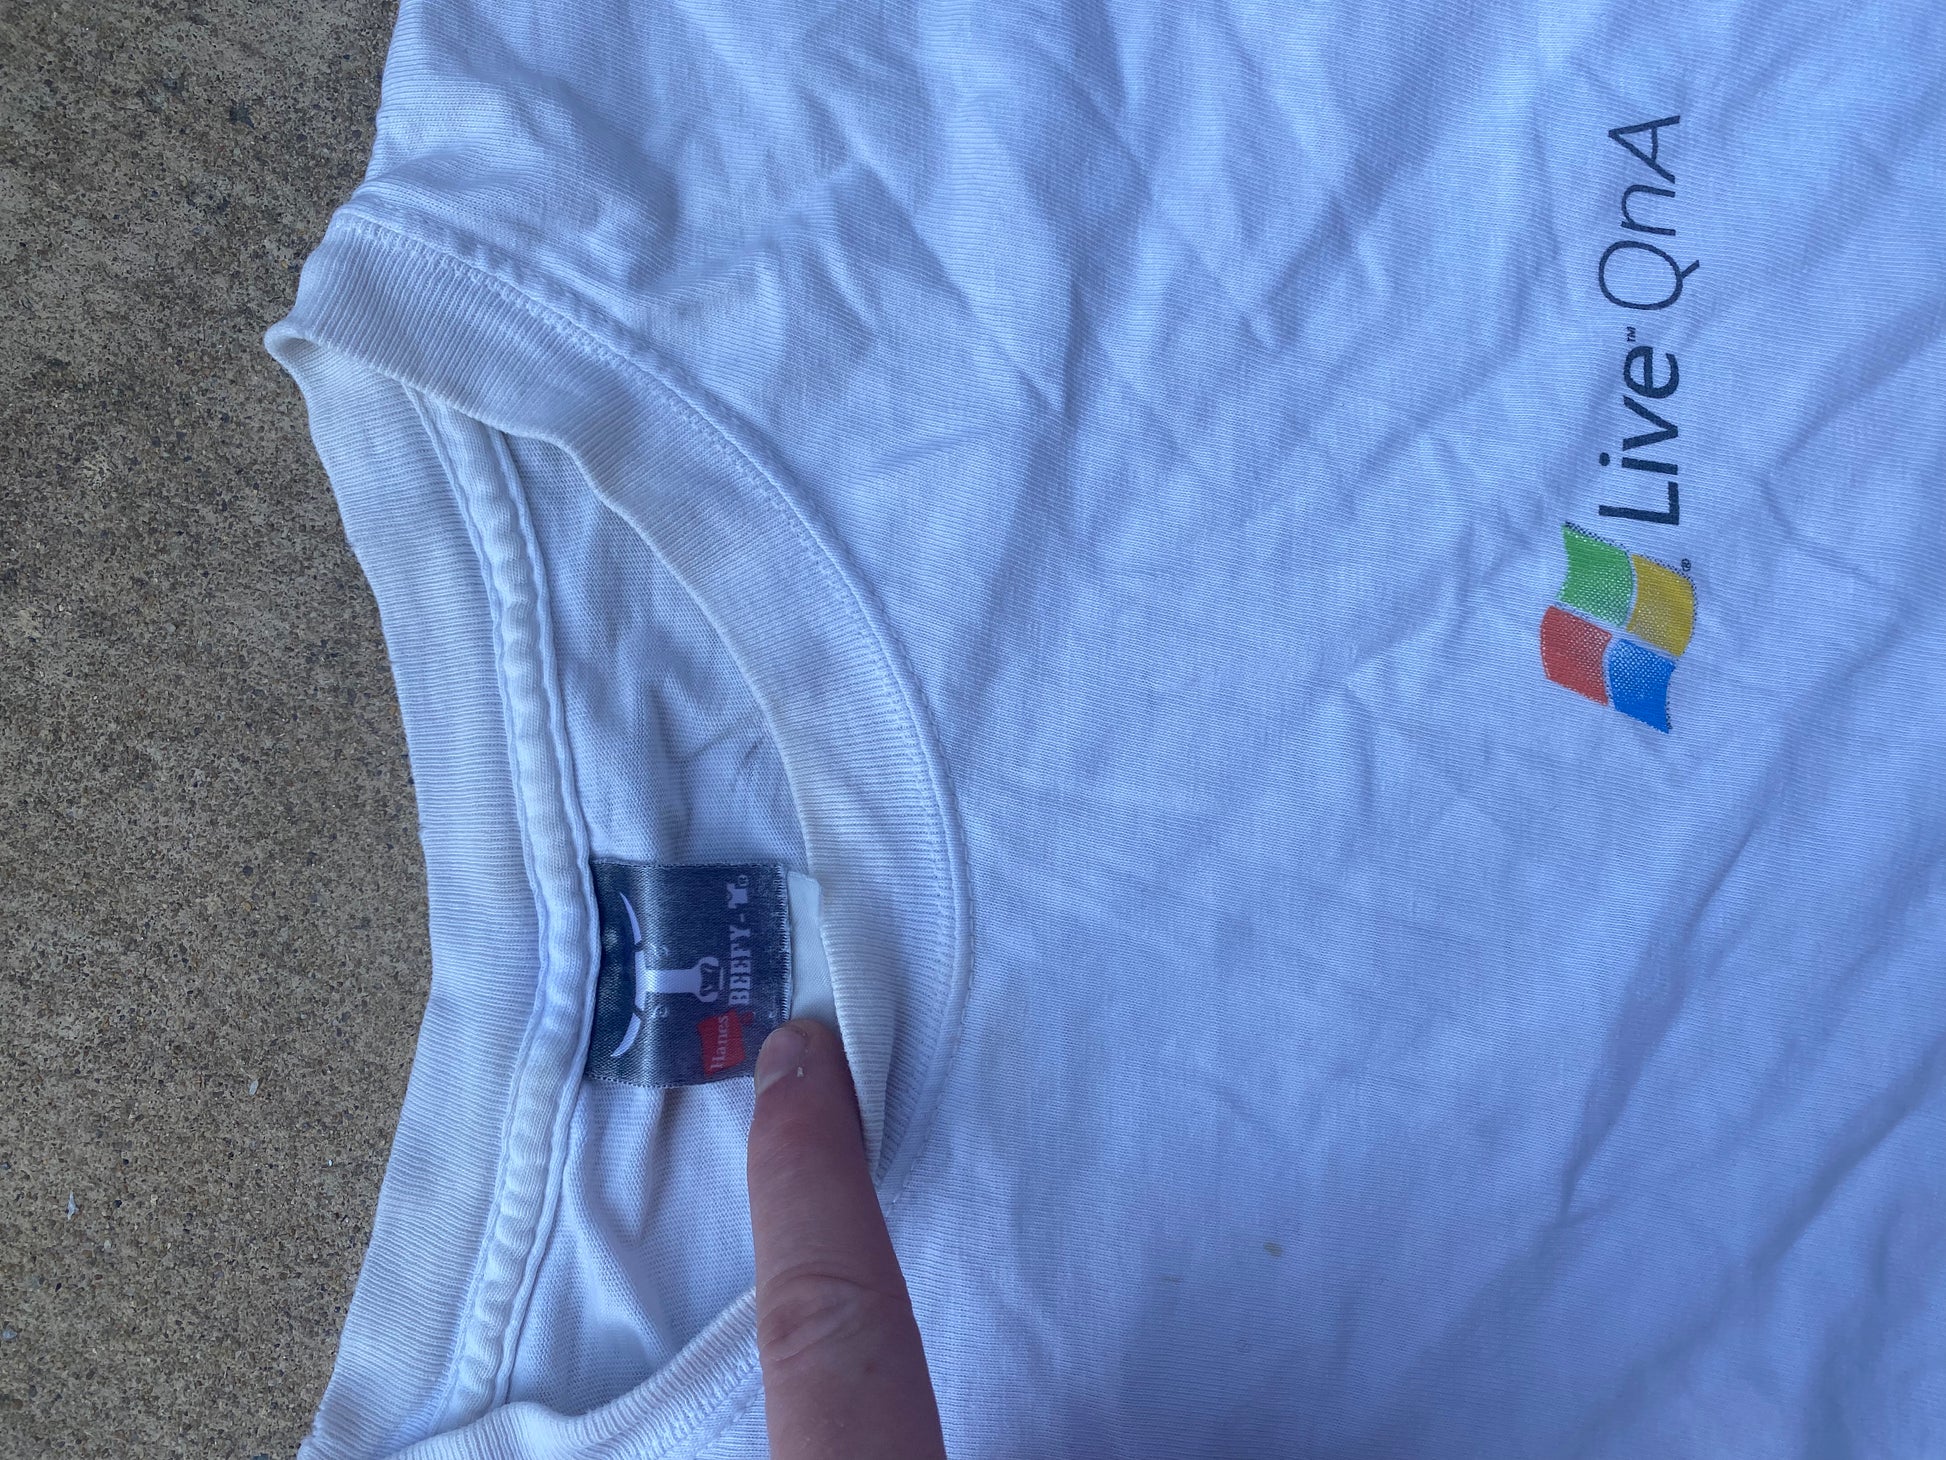 Windows Live Q and A Tee - Brimm Archive Wardrobe Research